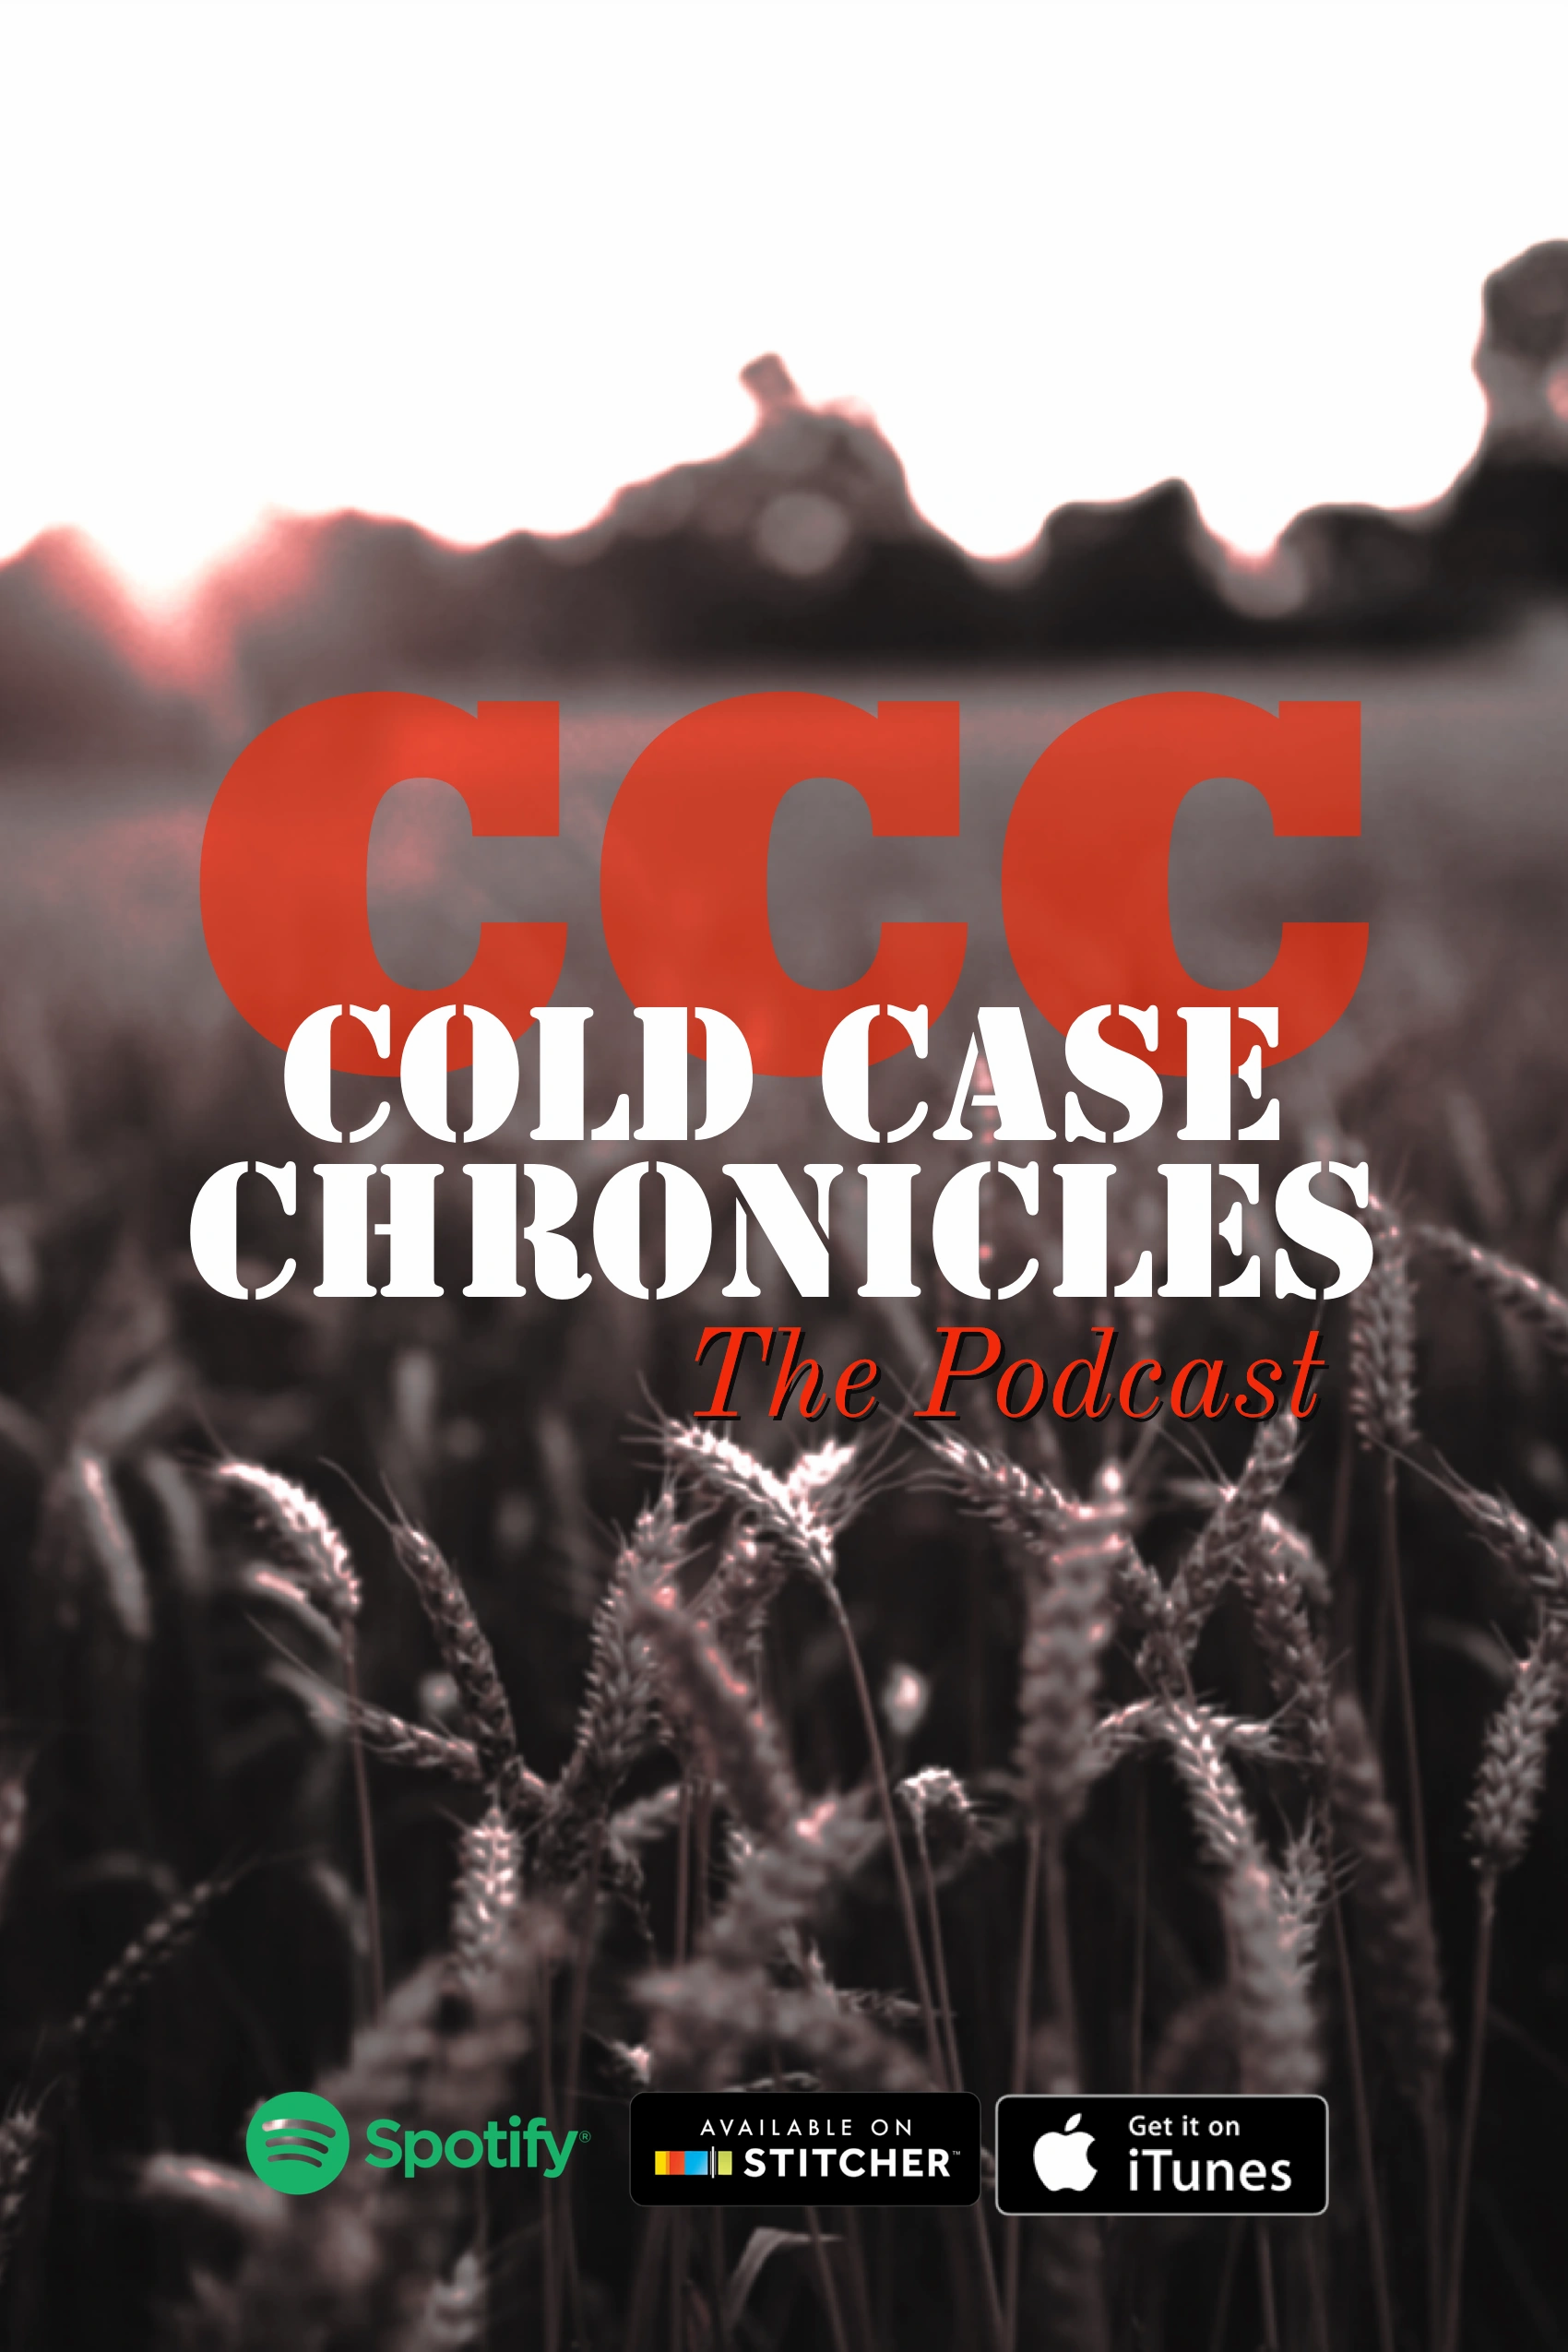 coldcasechronicles.com